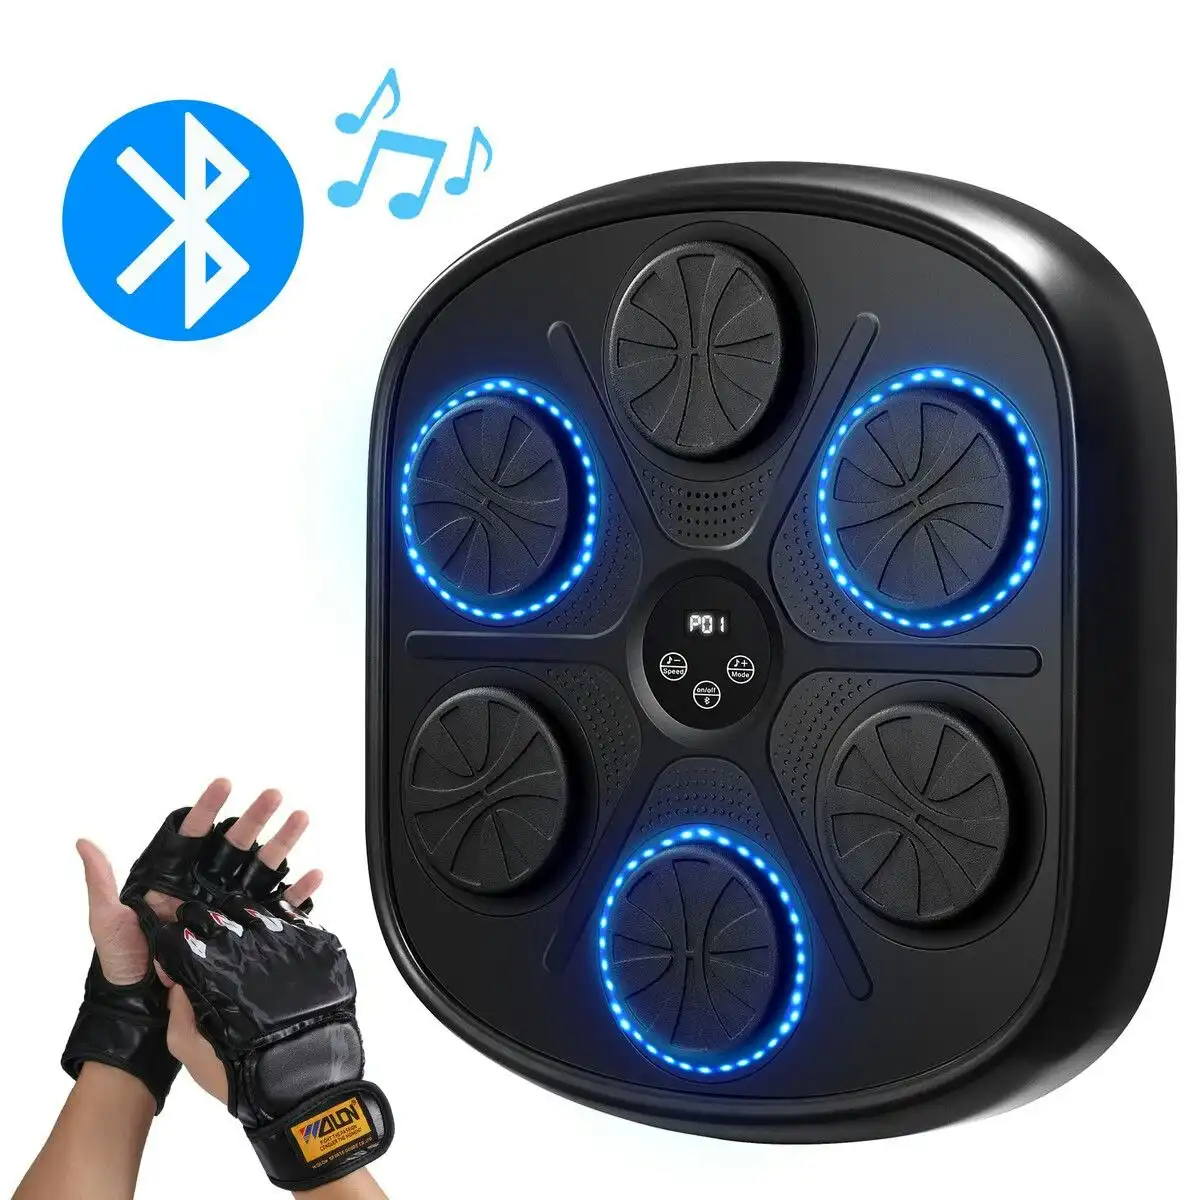 Ausway Music Boxing Machine Pad with Punching Gloves Smart Electronic Bluetooth Training Home Gym Wall Target Equipment USB Charger